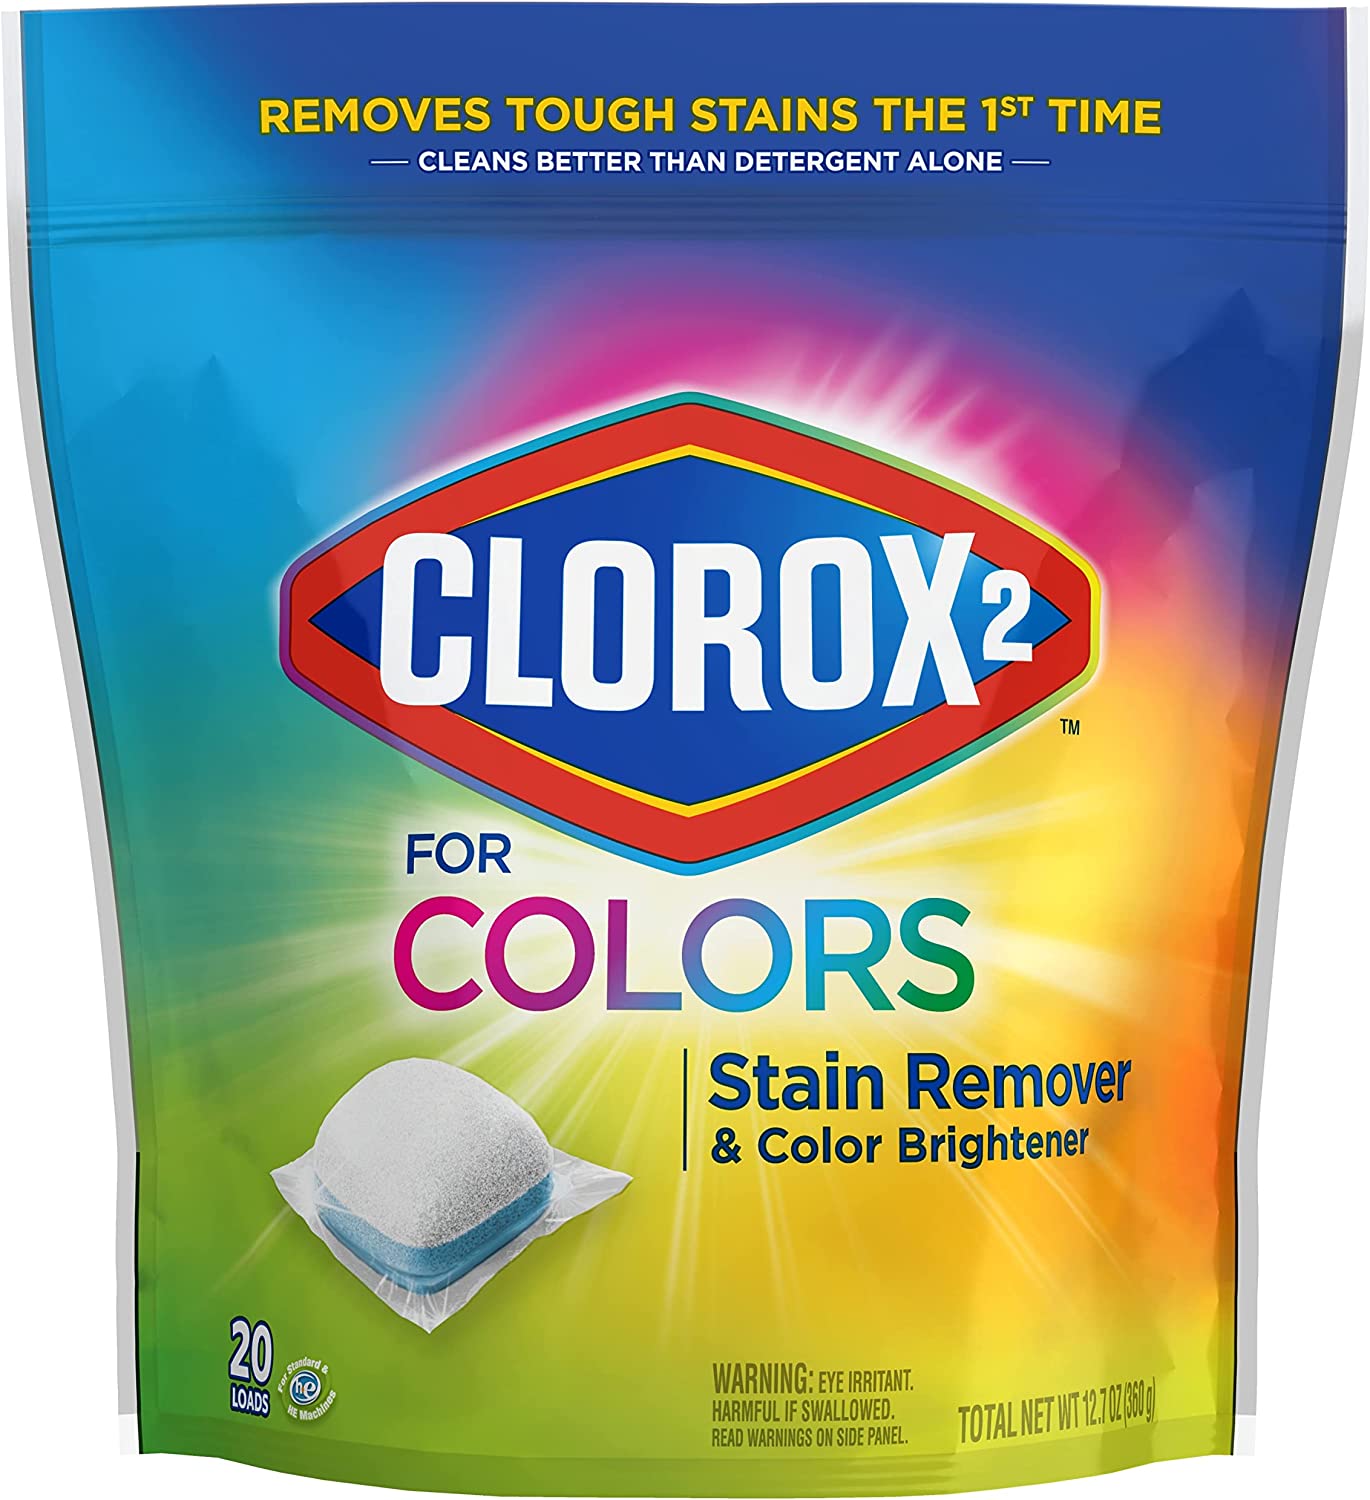 6-Pack 20-Count Clorox 2 for Colors Stain Remover and Color Brightener Packs (Fresh Scent) $8.43 via Amazon